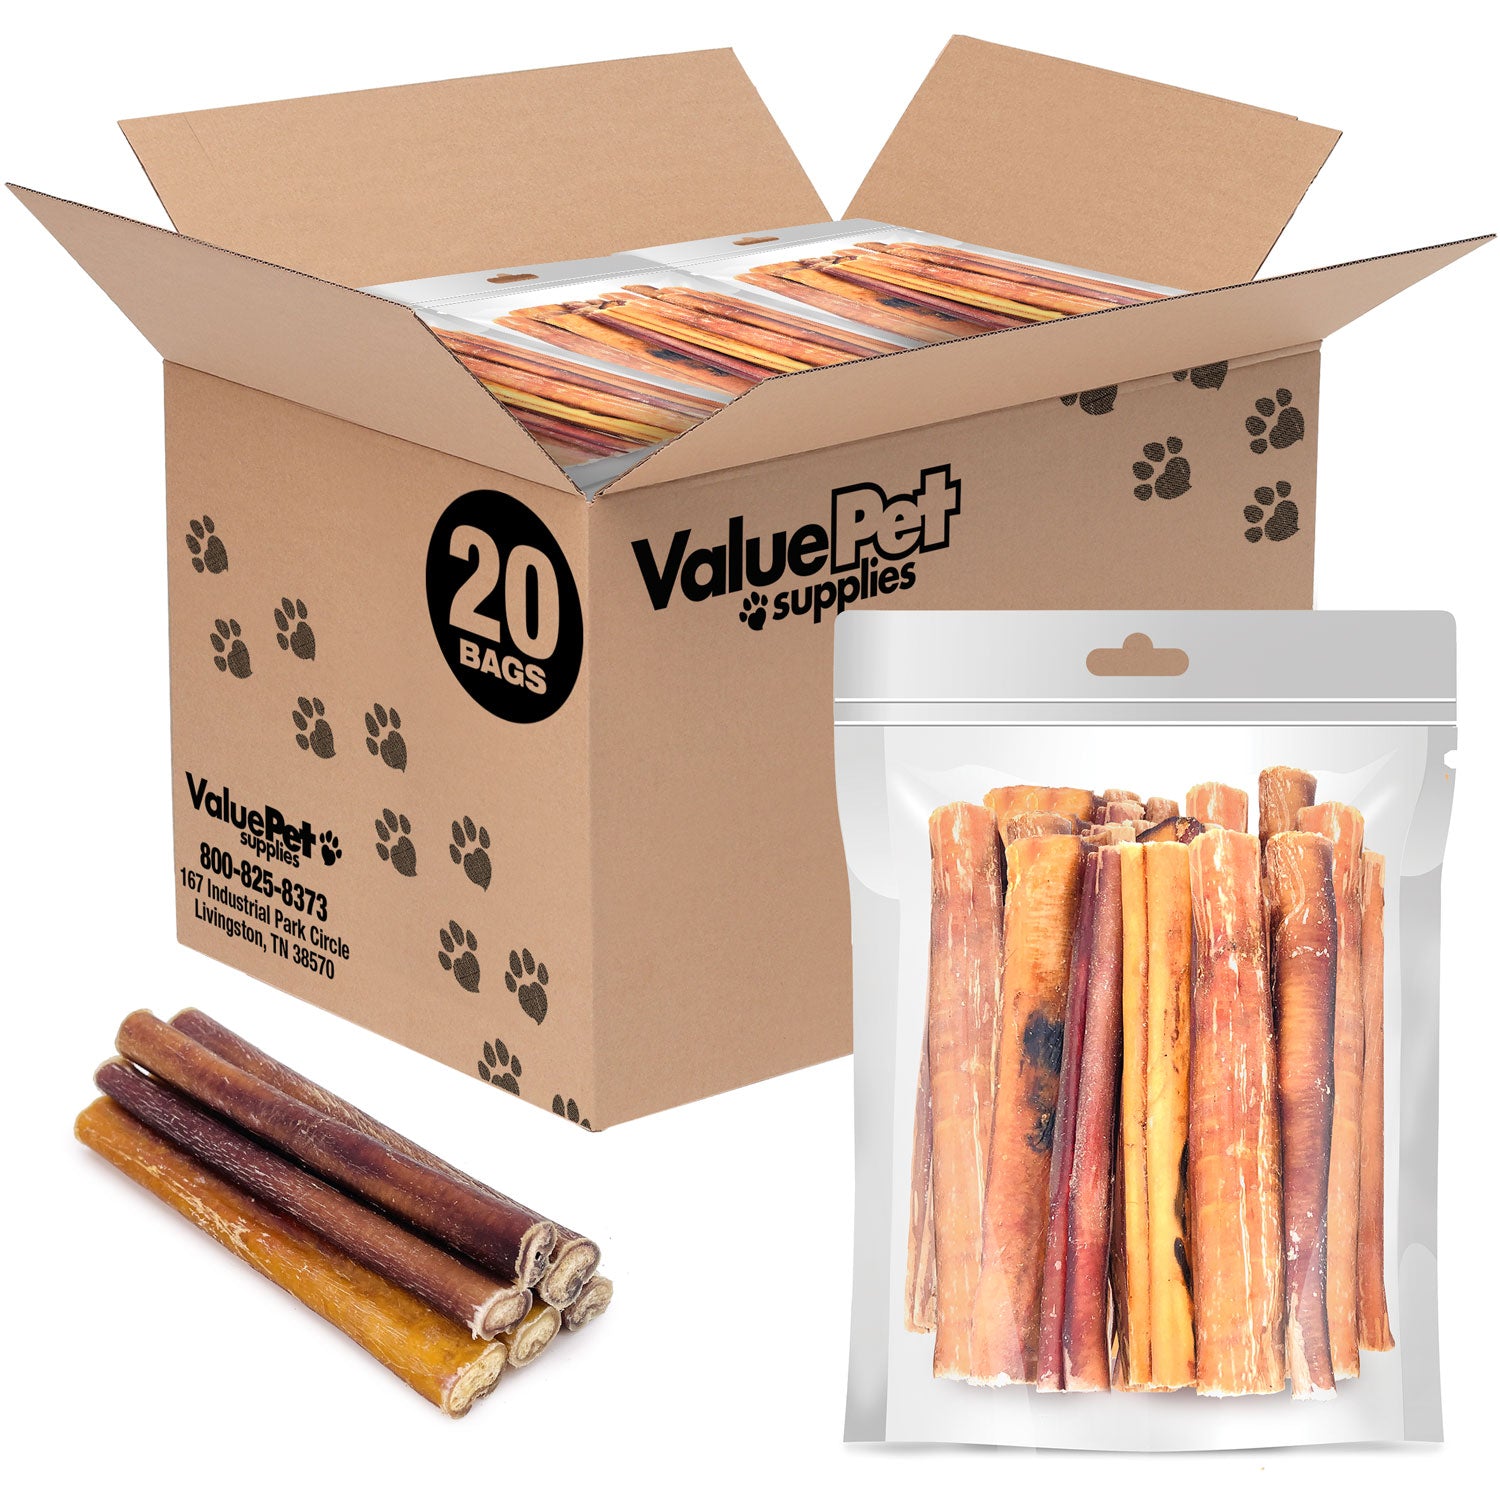 ValueBull Bully Sticks for Dogs, Thick 6 Inch, 400 Count RESALE PACKS (20 x 20 Count)